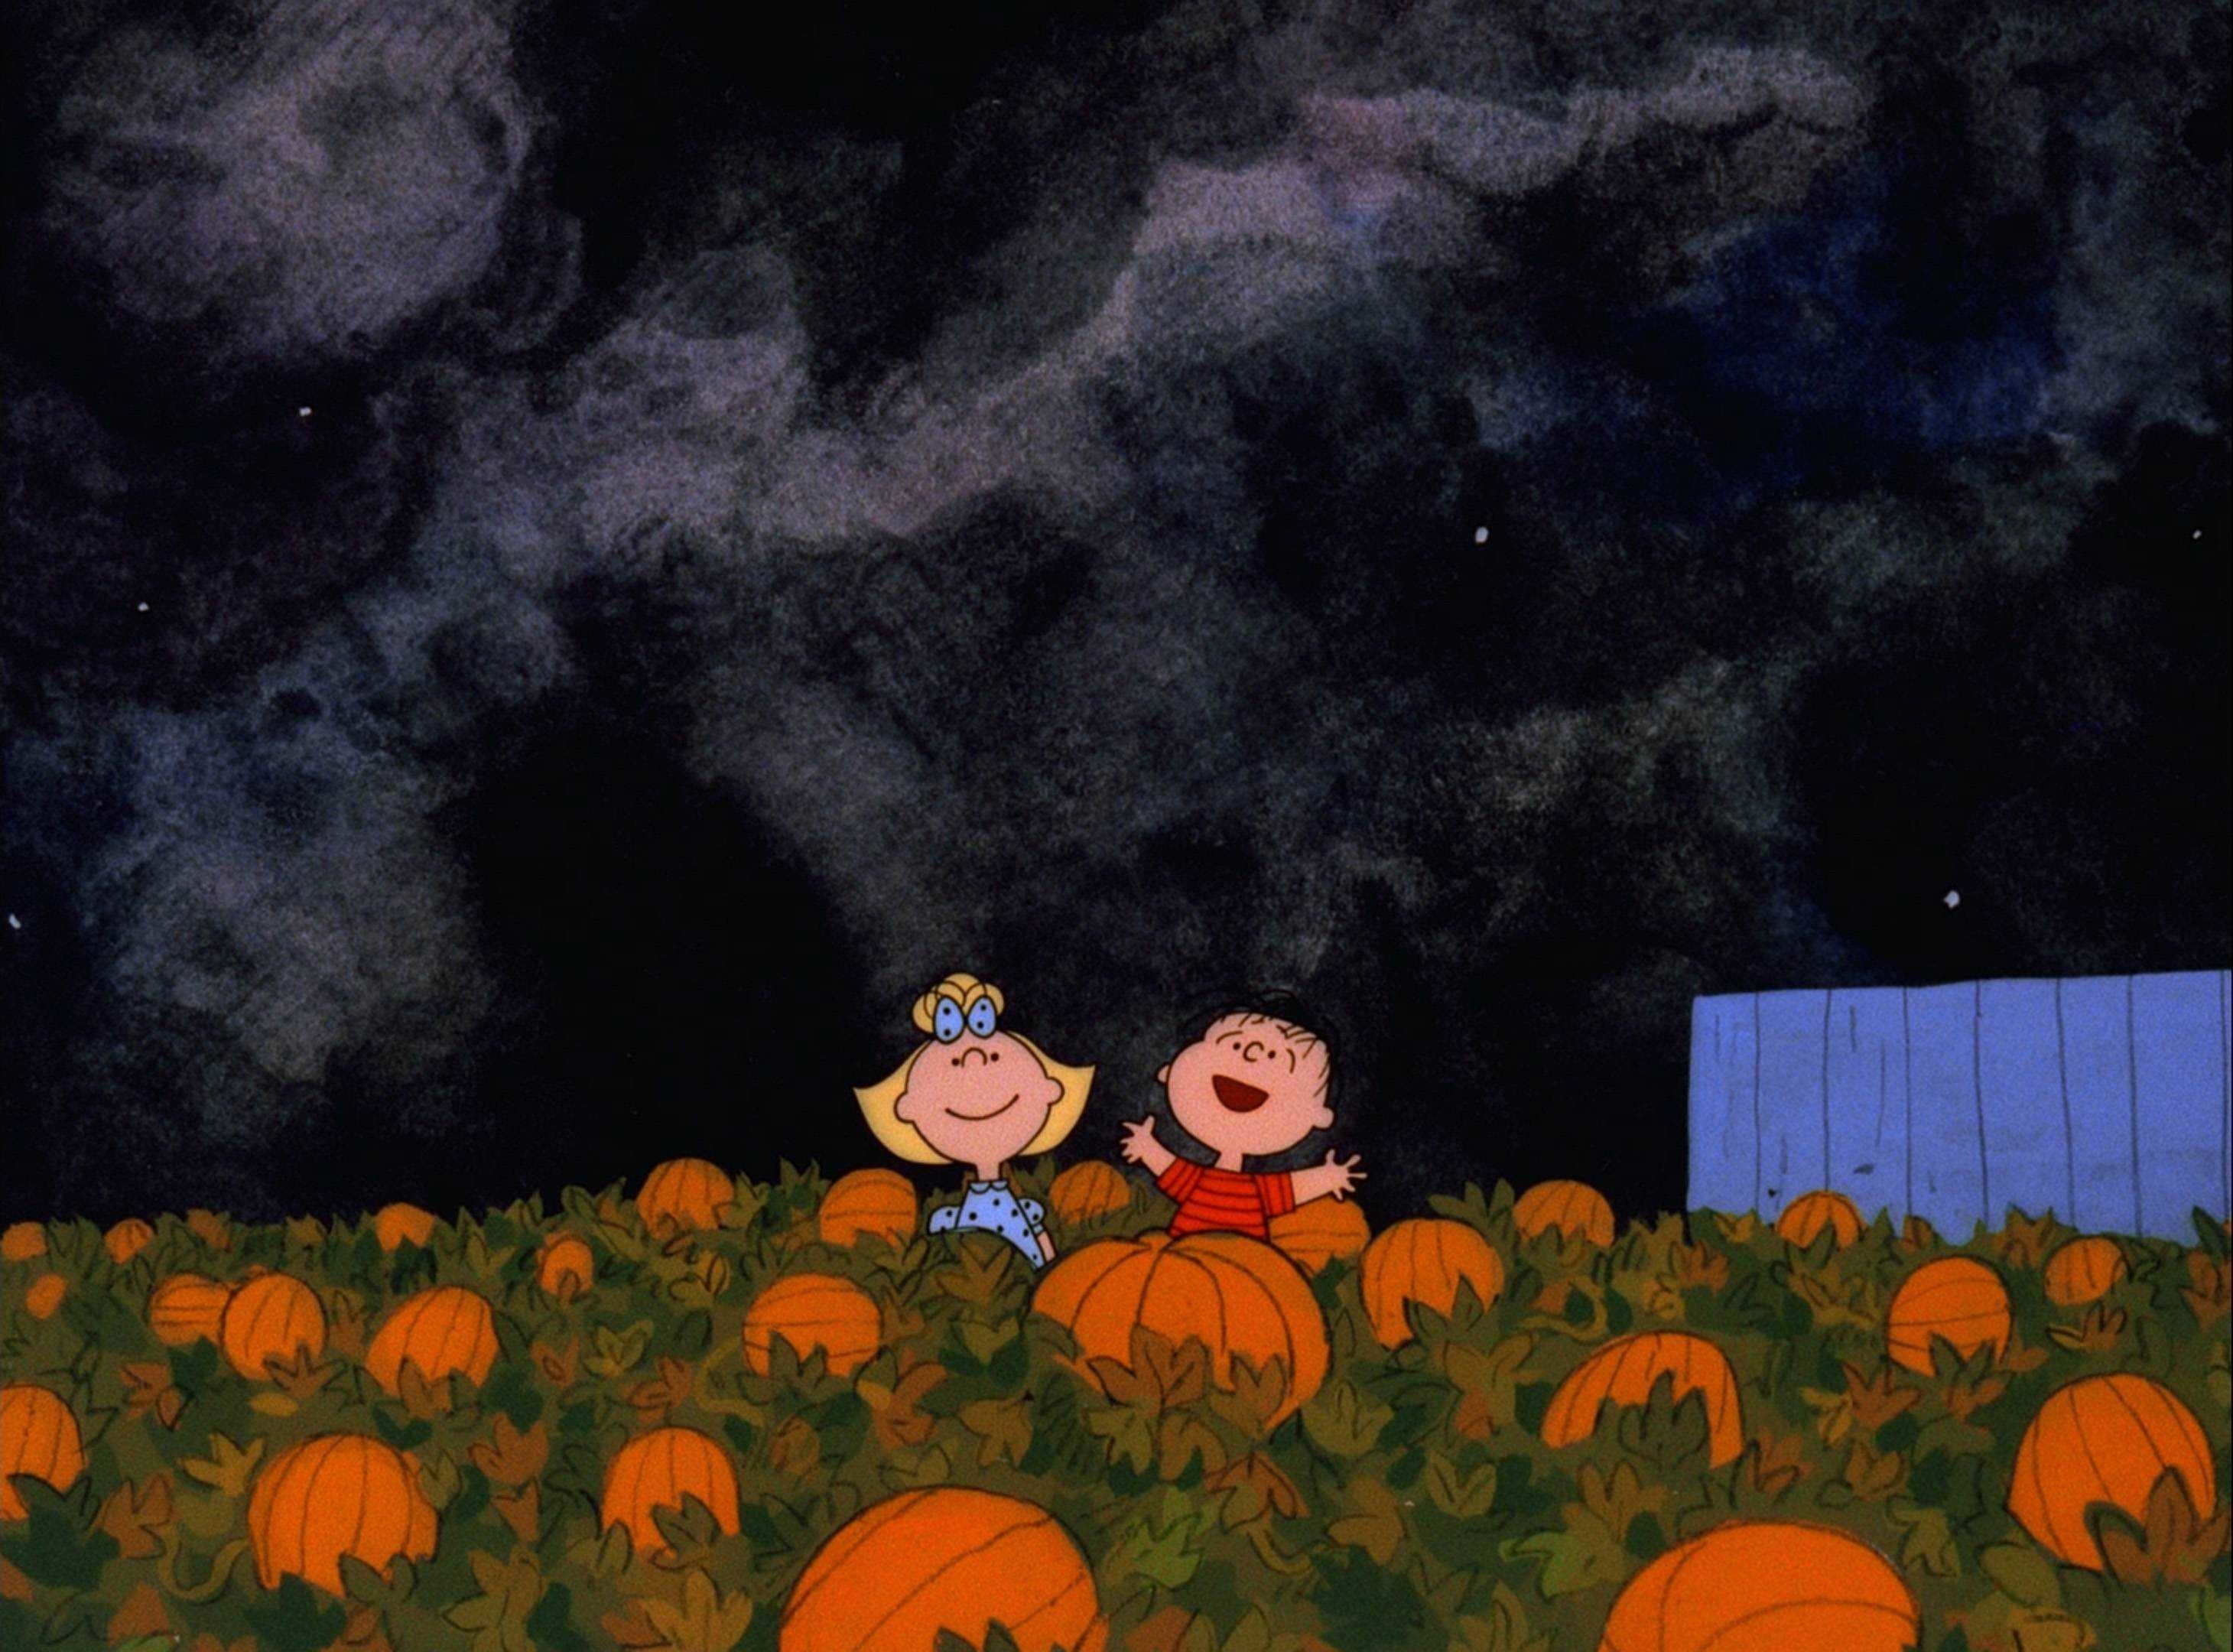 Charlie Brown and his friend Sally sit on a pumpkin in a pumpkin patch. - Cute Halloween, Halloween desktop, Halloween, Charlie Brown